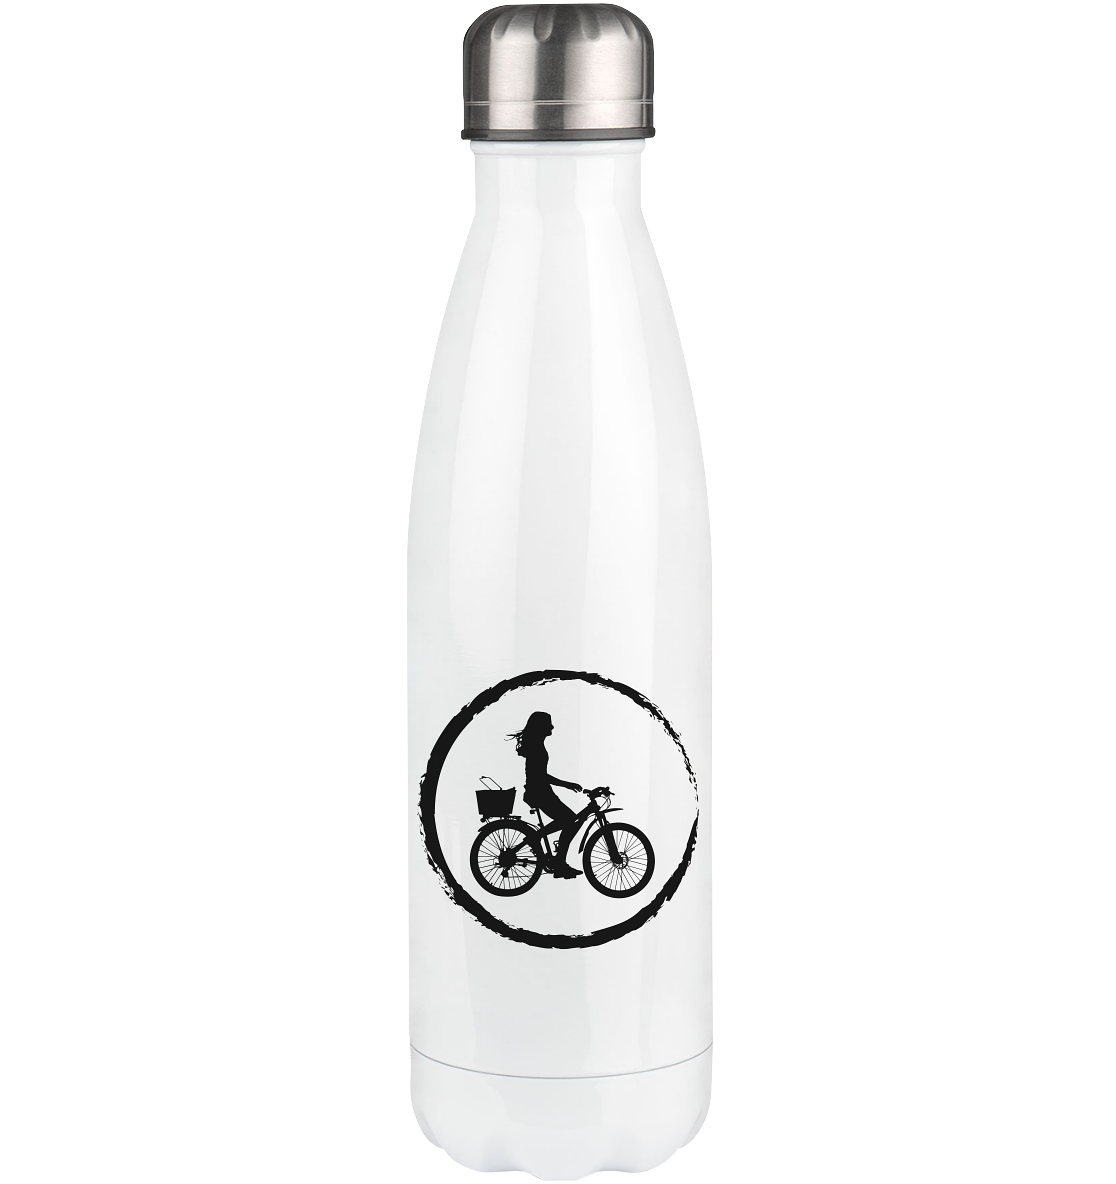 Cricle and Cycling - Edelstahl Thermosflasche fahrrad 500ml